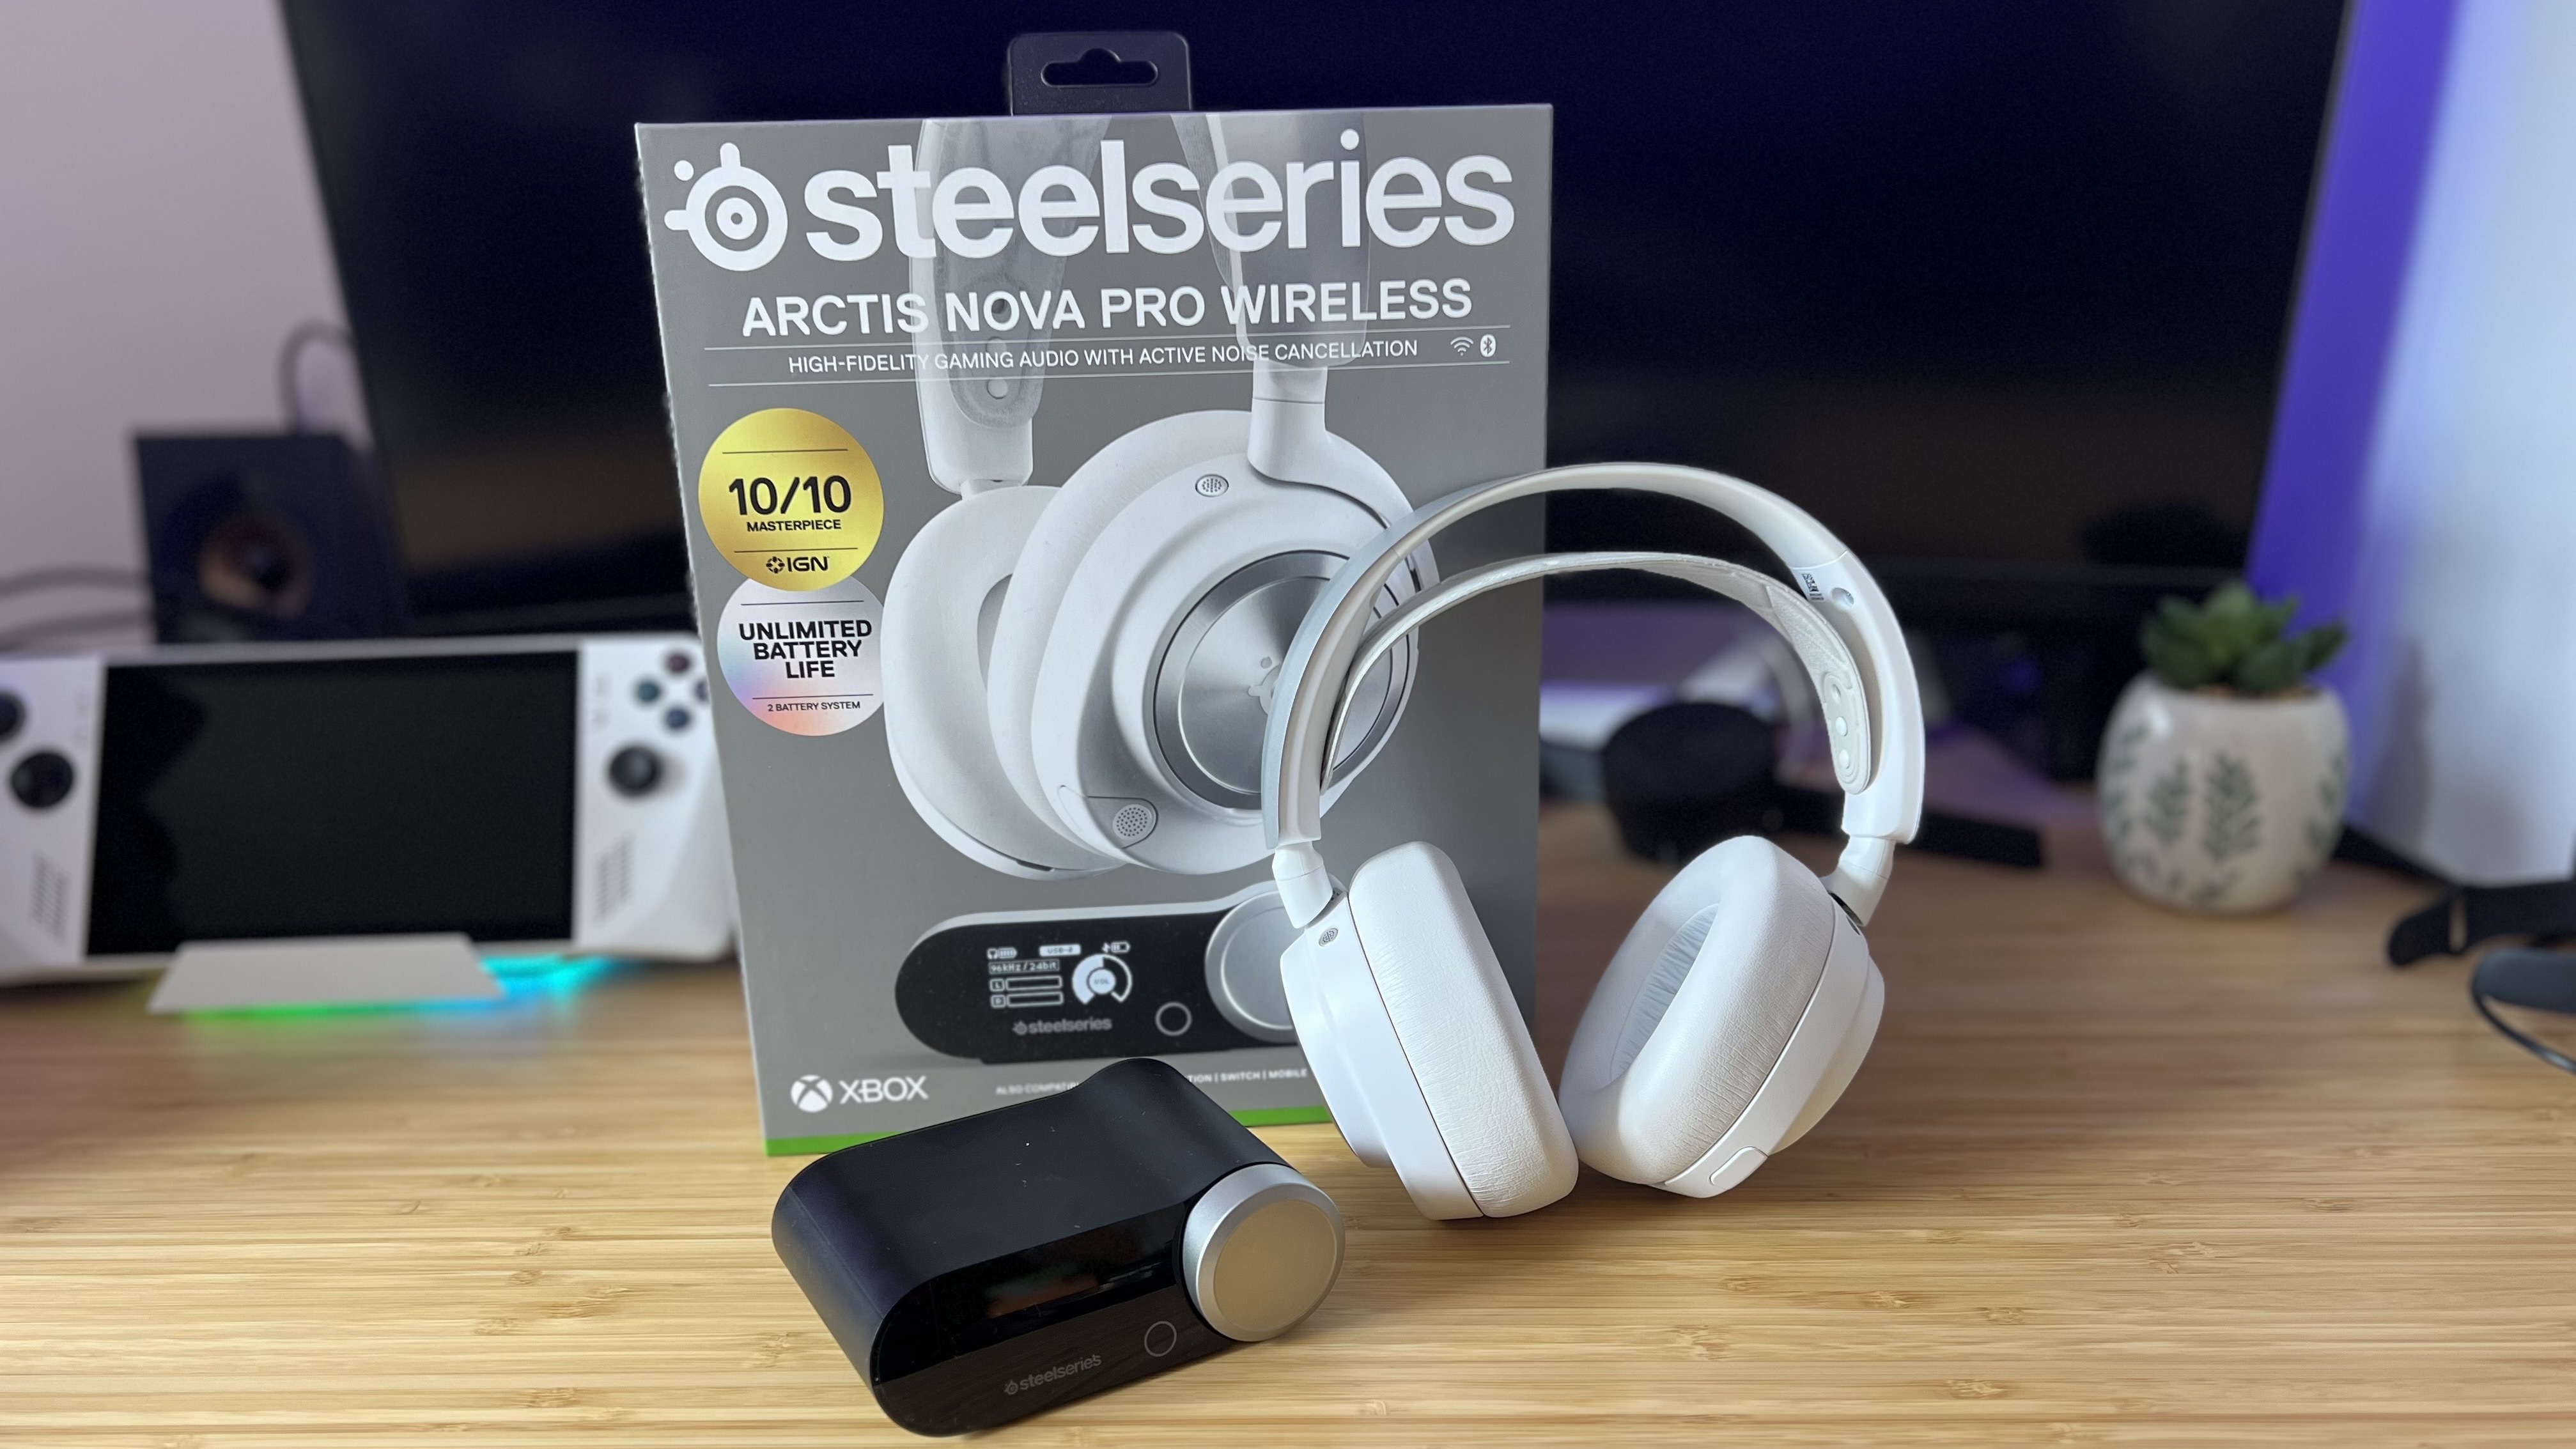 SteelSeries Arctis Nova Pro Wireless in white with packaging and hub on a wooden desk